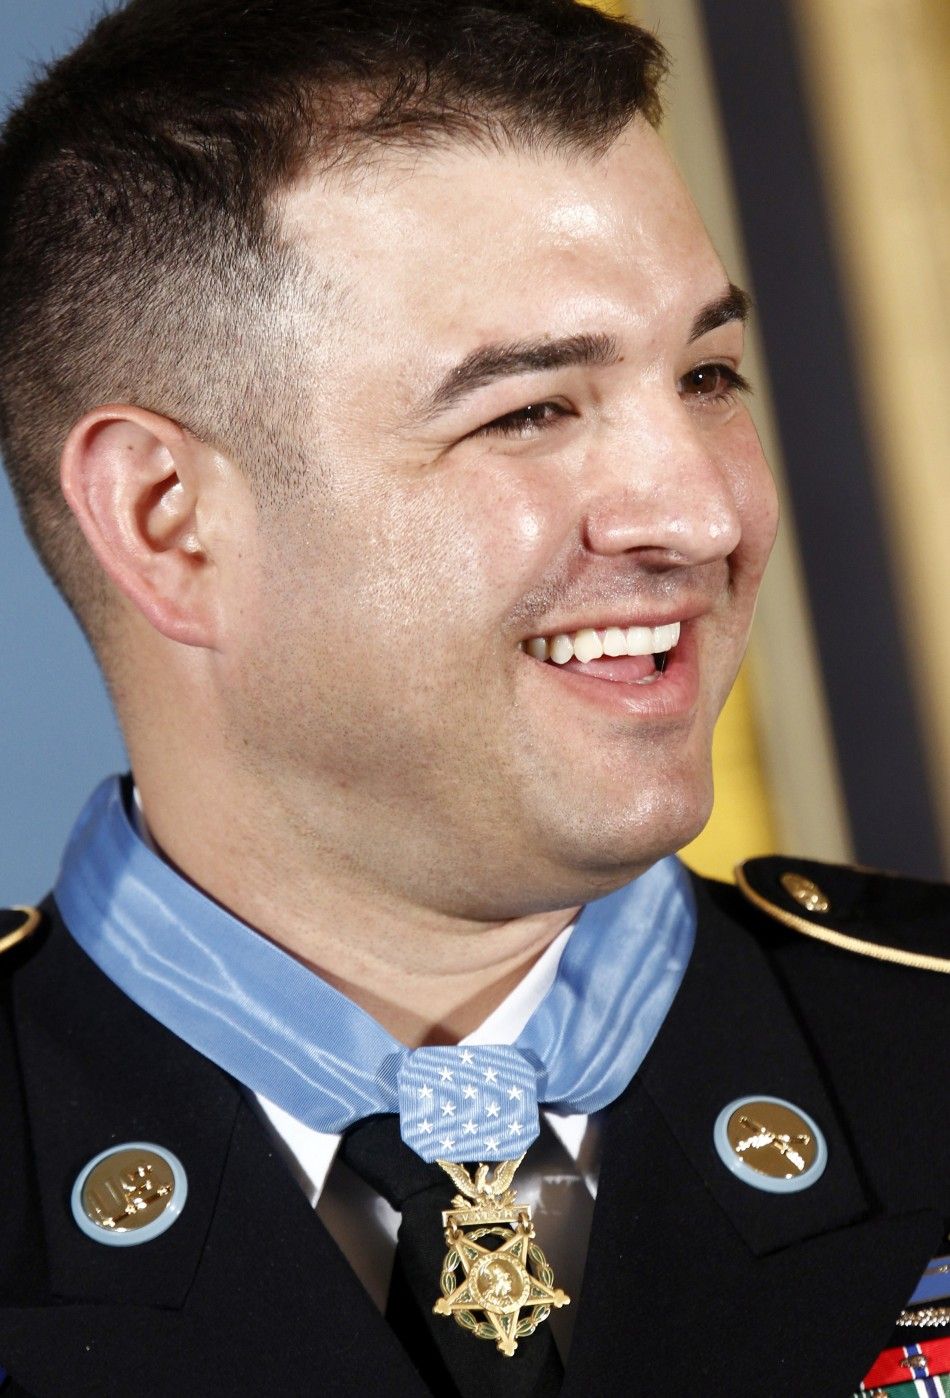 President Barack Obama awarded the Medal of Honor on Tuesday afternoon to Army Ranger Sergeant 1st Class Leroy Petry, the second living soldier to win the militarys highest decoration for actions in Afghanistan.